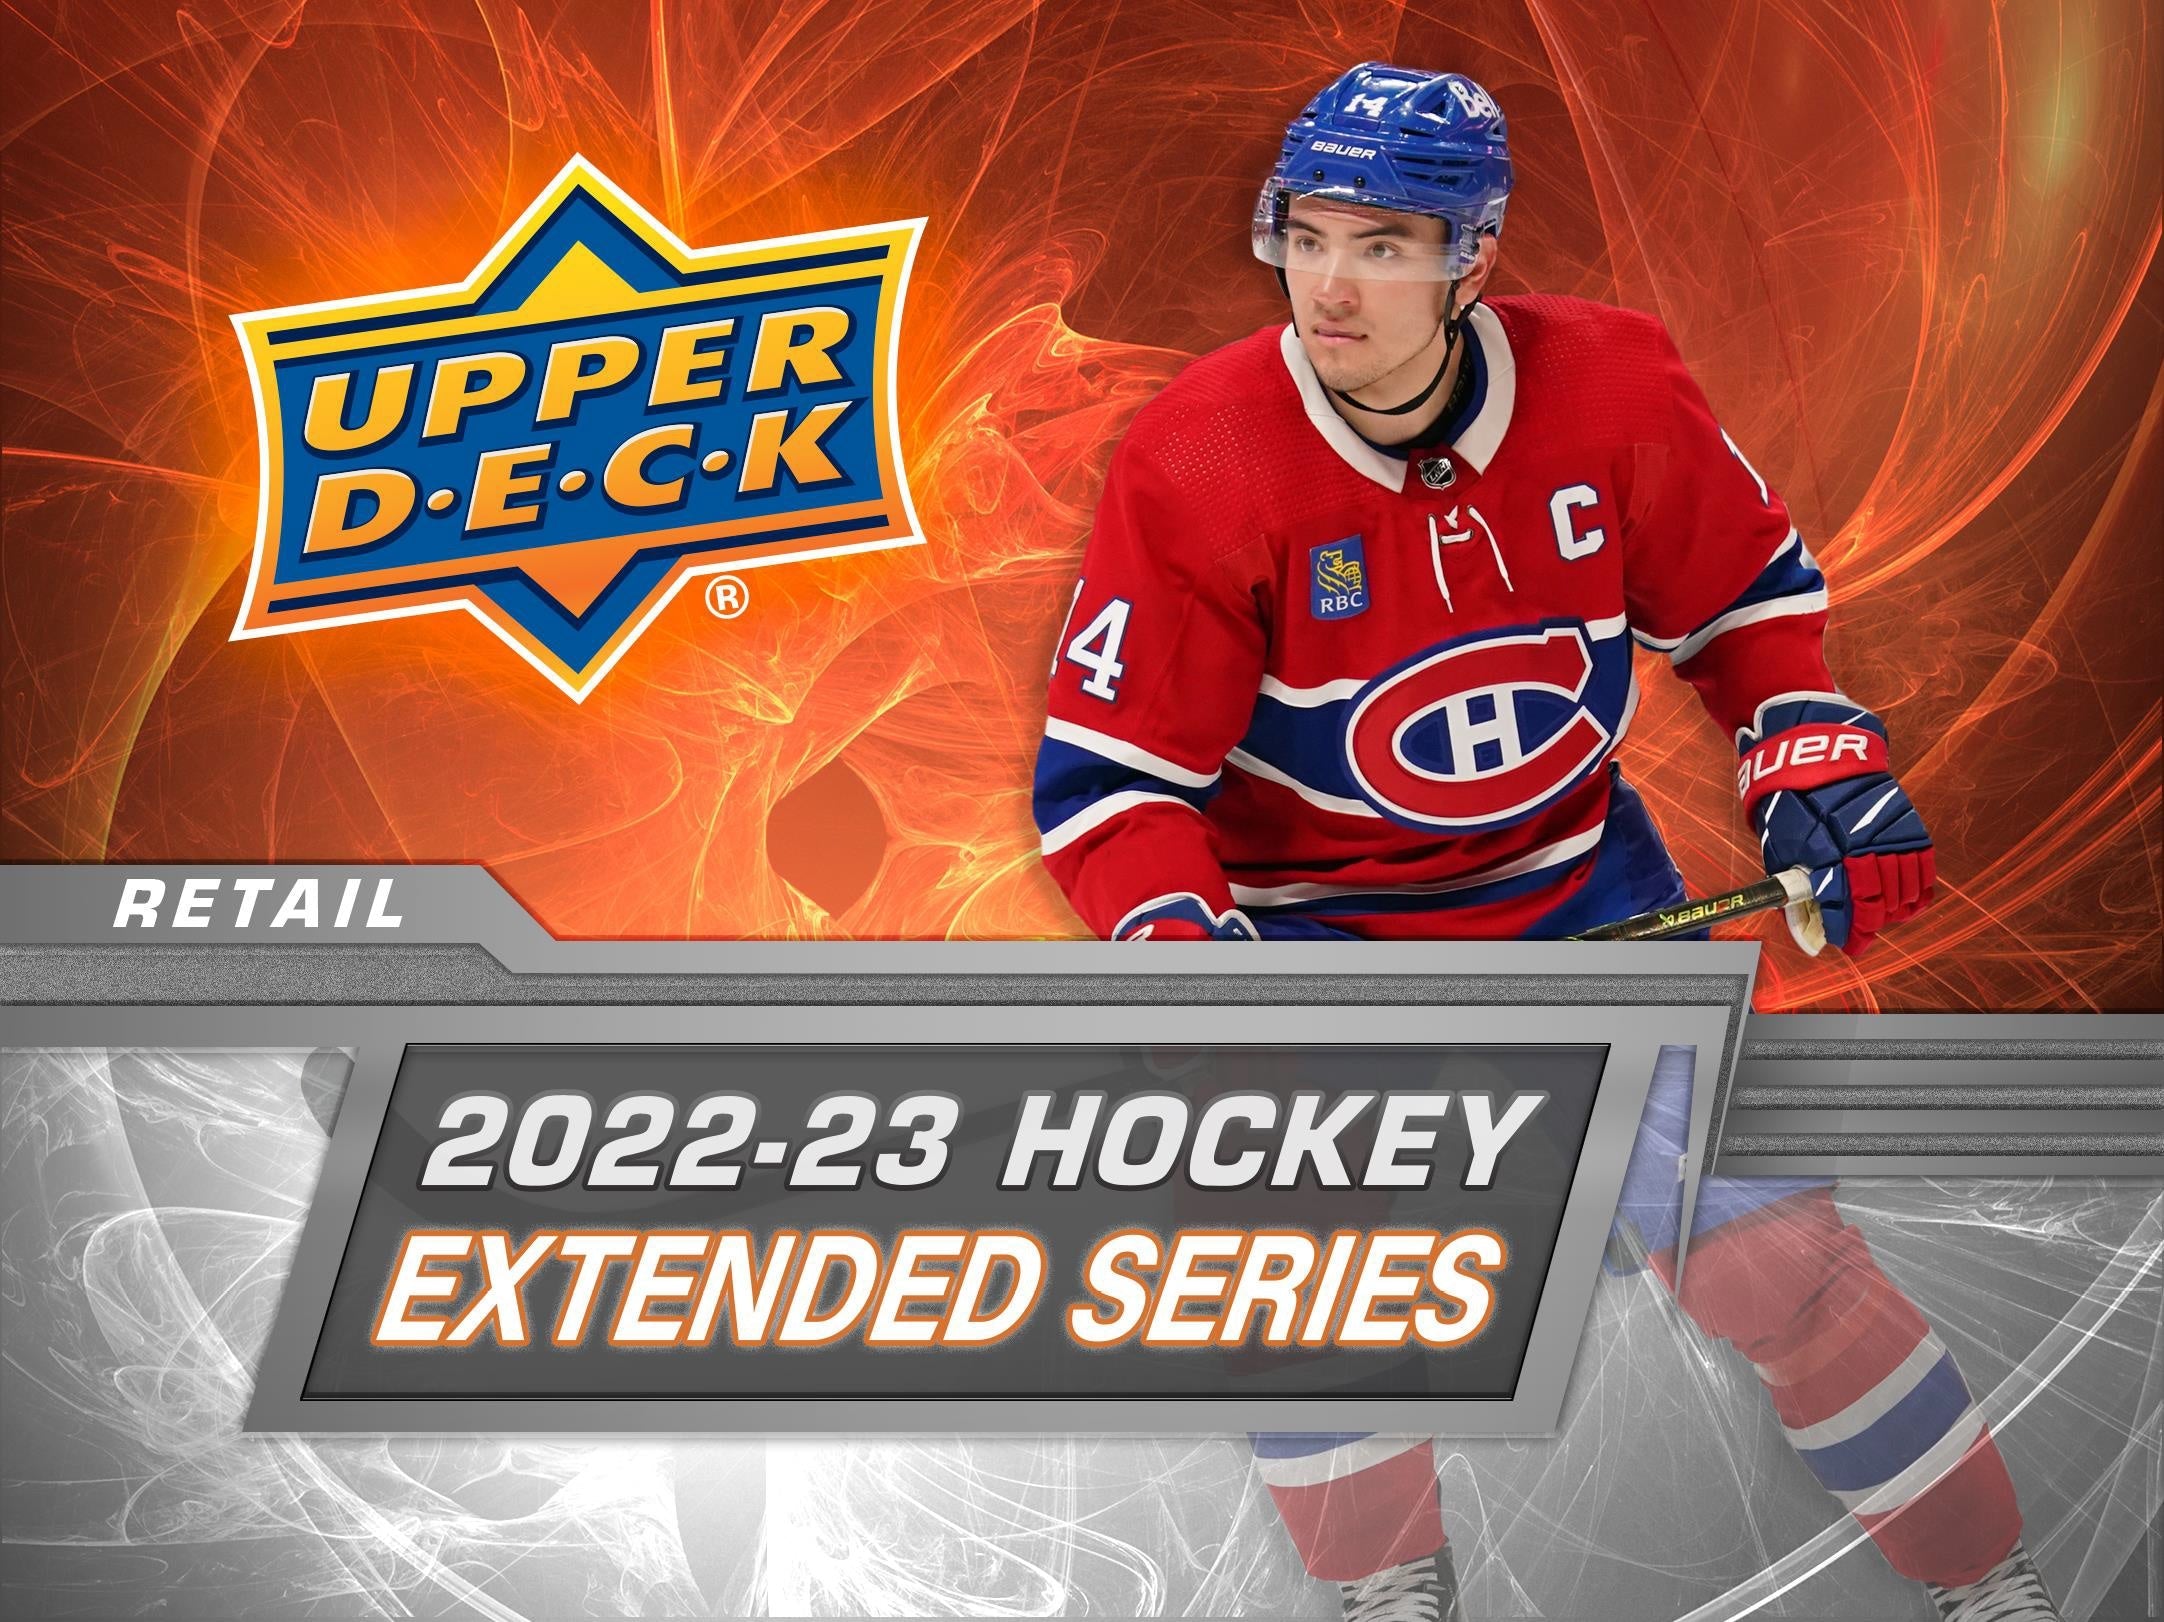 2020-21 Upper Deck Extended Series Retail Hockey, 20 Box Case